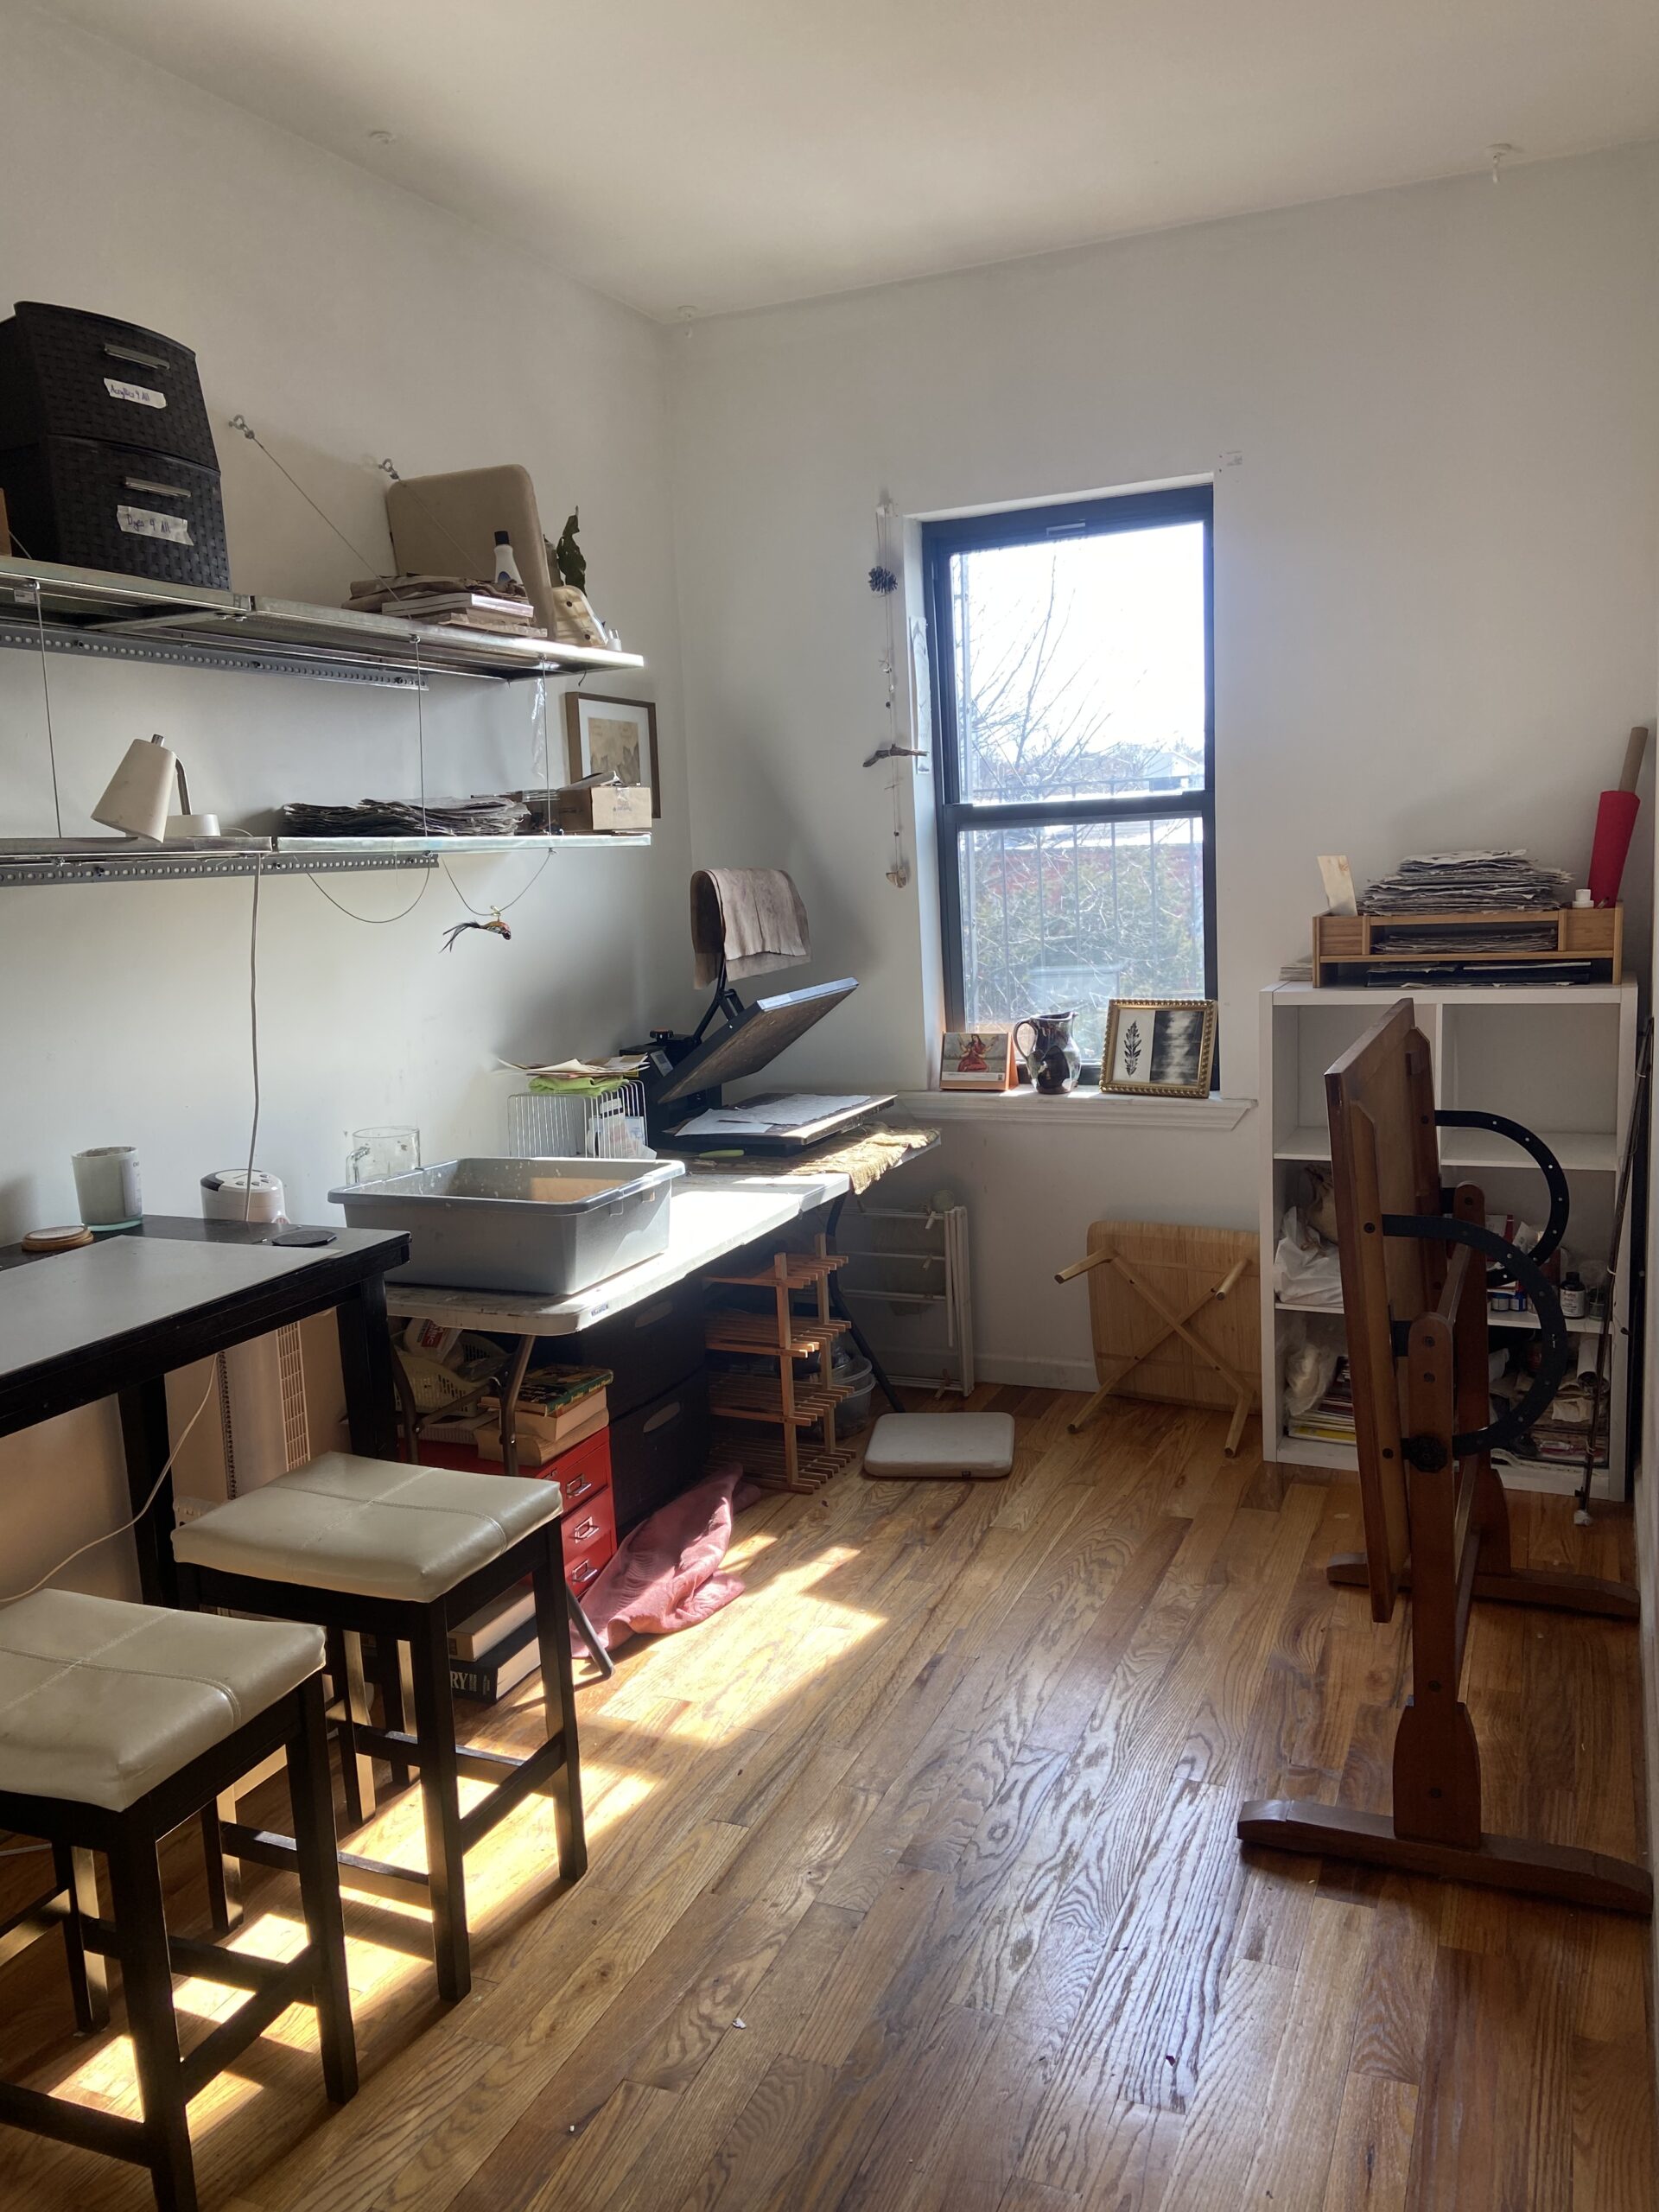 Naturally-lit shared art studio in BUSHWICK. $350 month to month.